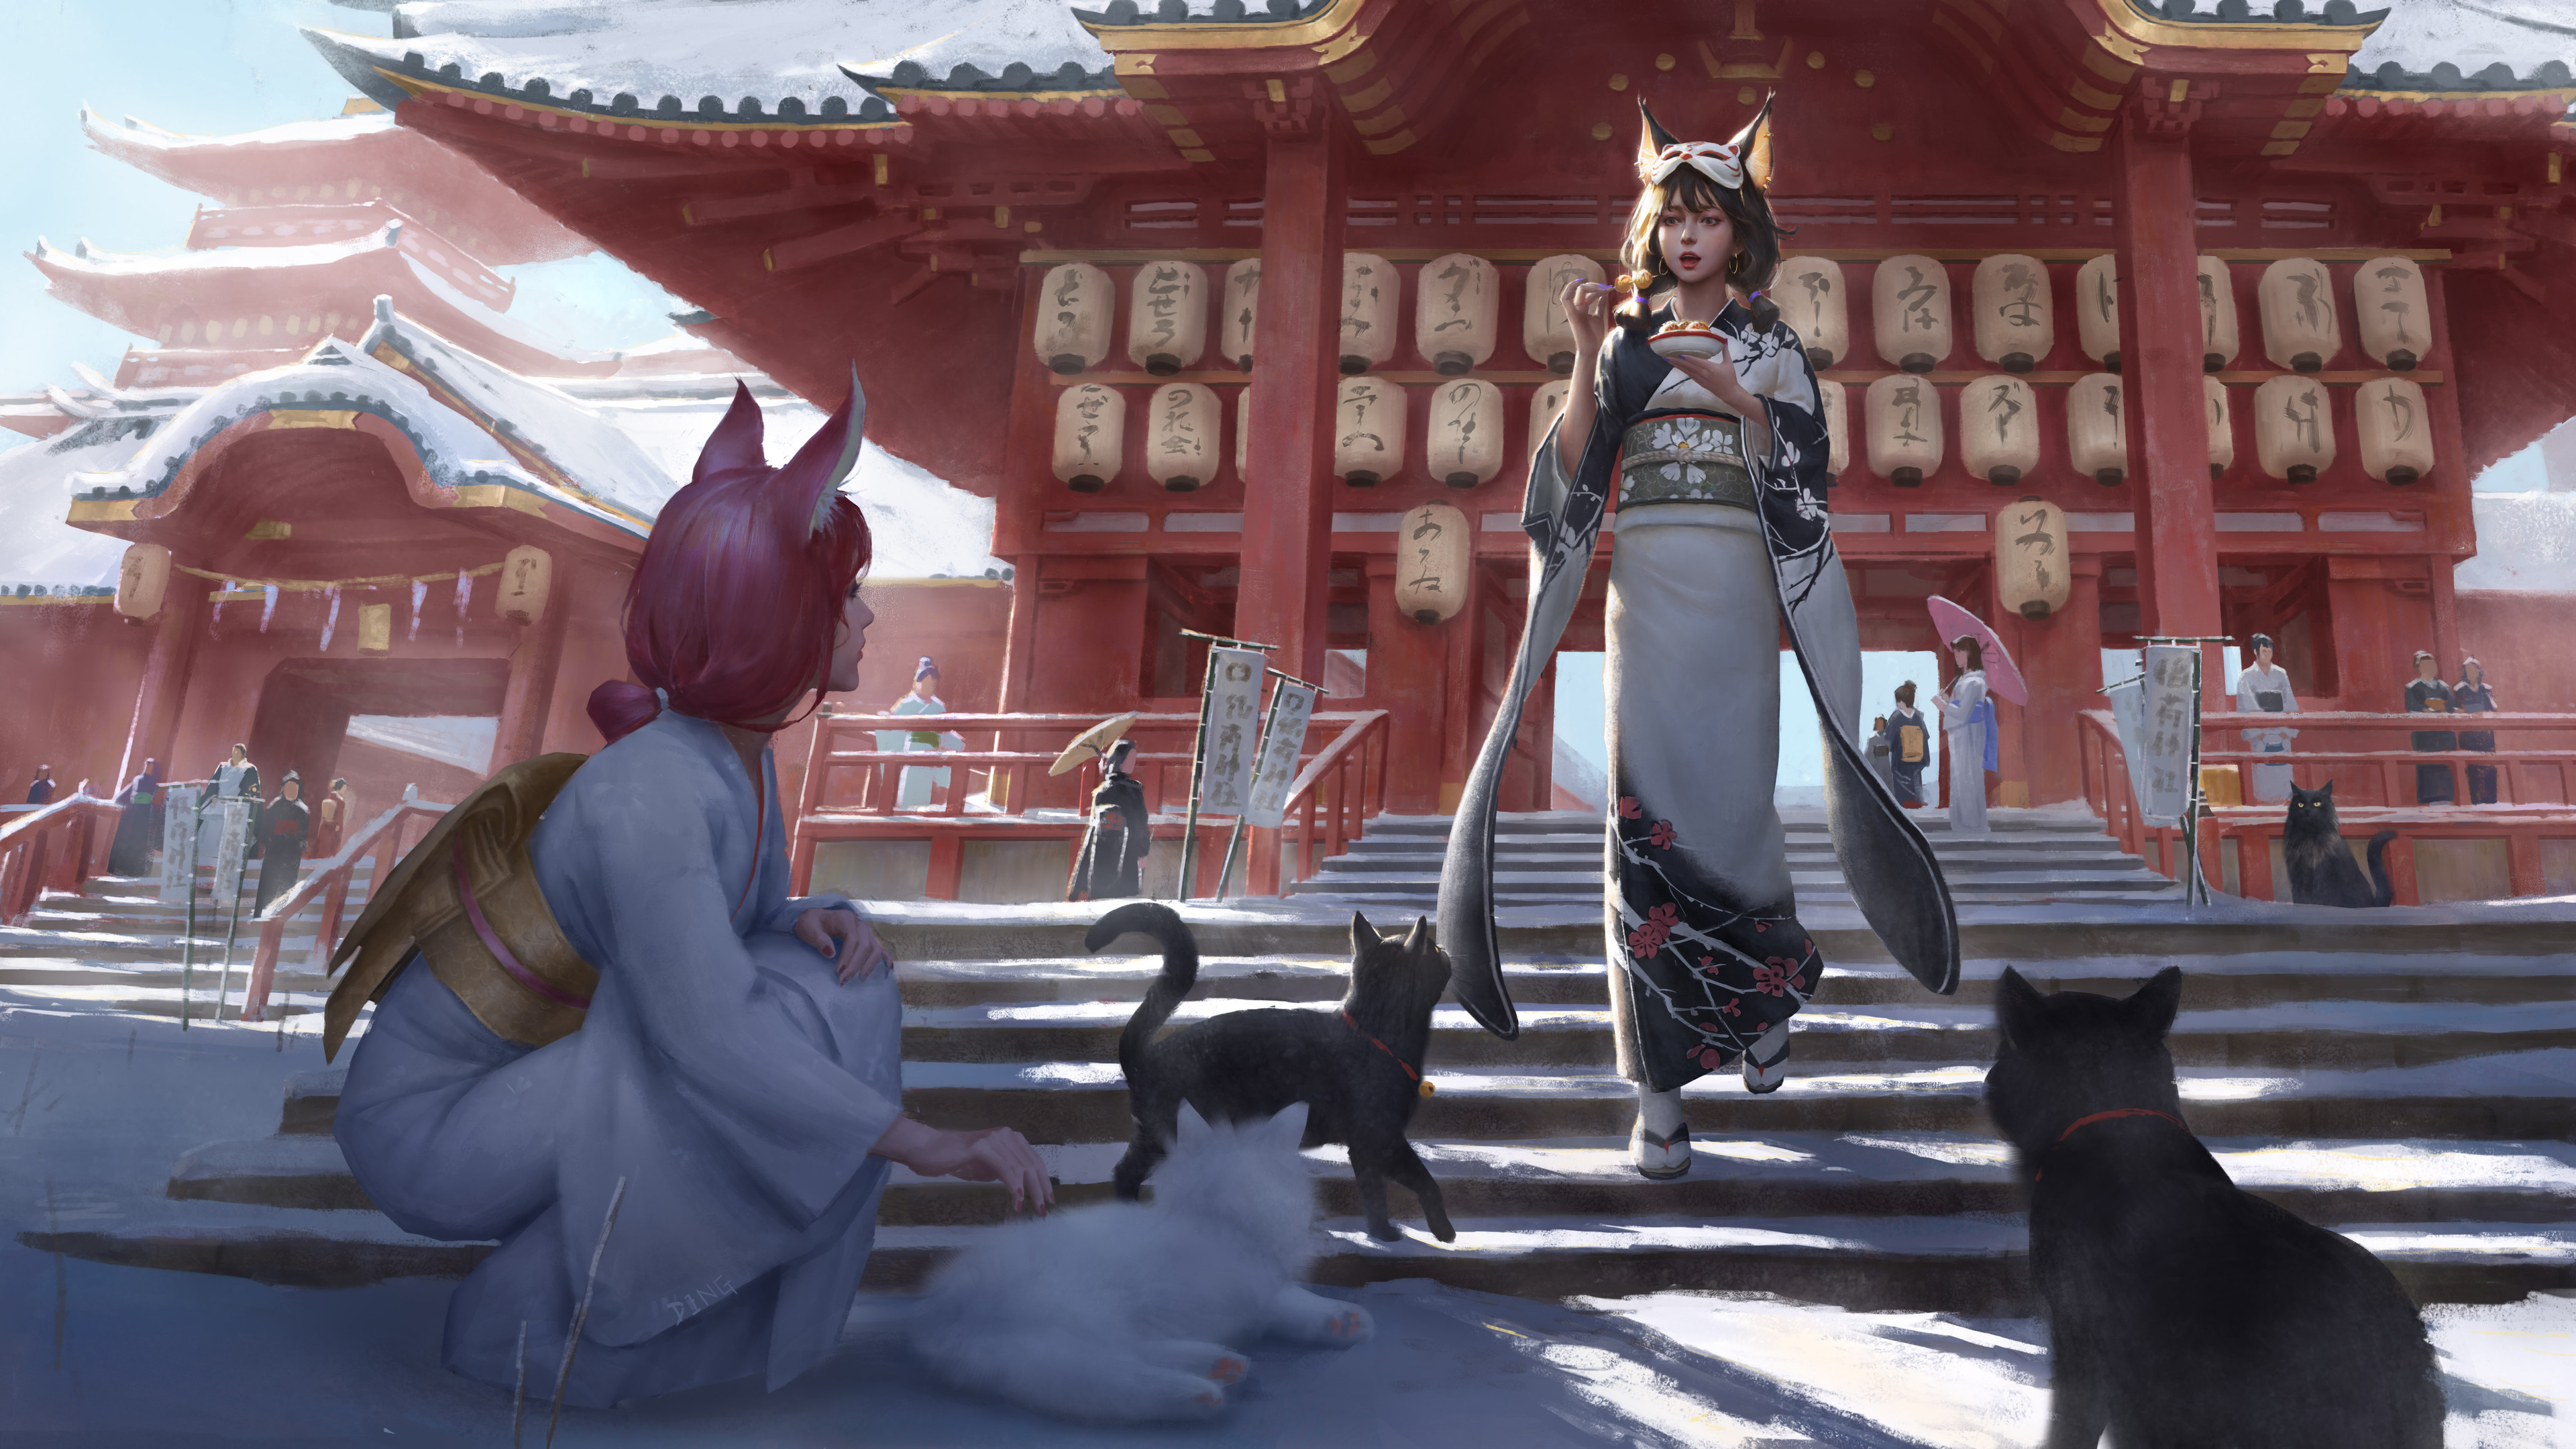 Artwork Fantasy Art Women Asian Architecture Asian Architecture Traditional Clothing Cats Cat Girl 3840x2160